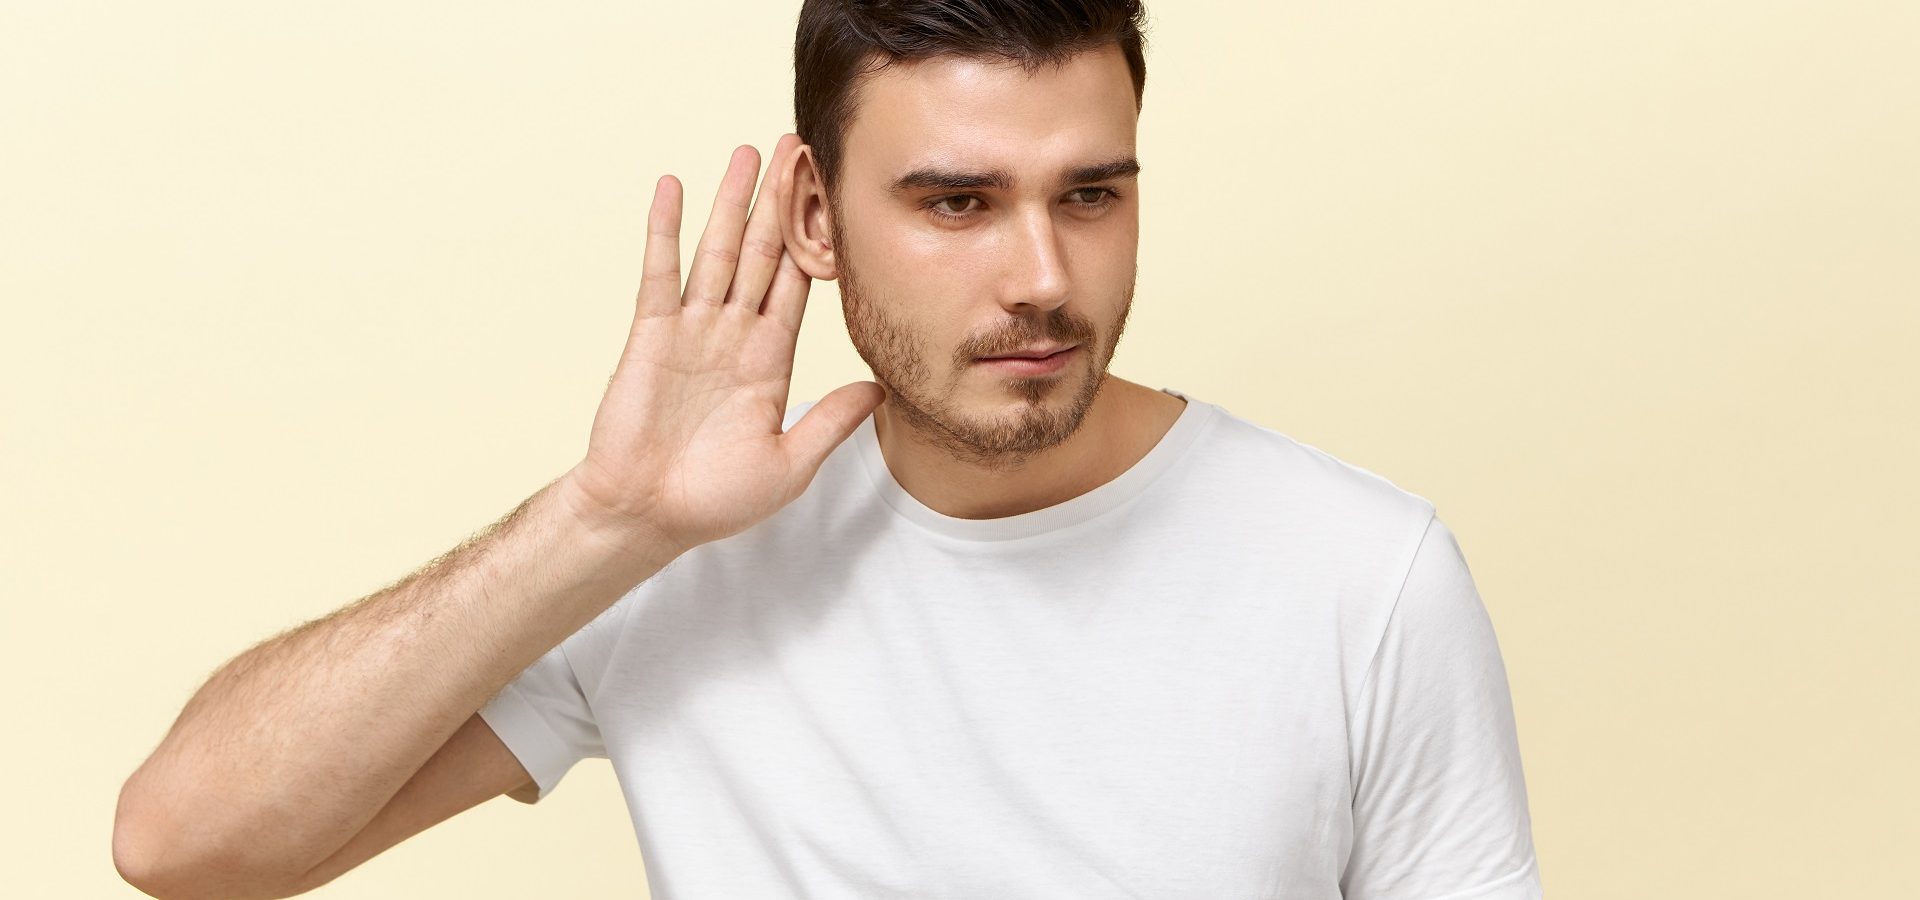 Young man holding his hand up to one ear, suffering from single-sided deafness